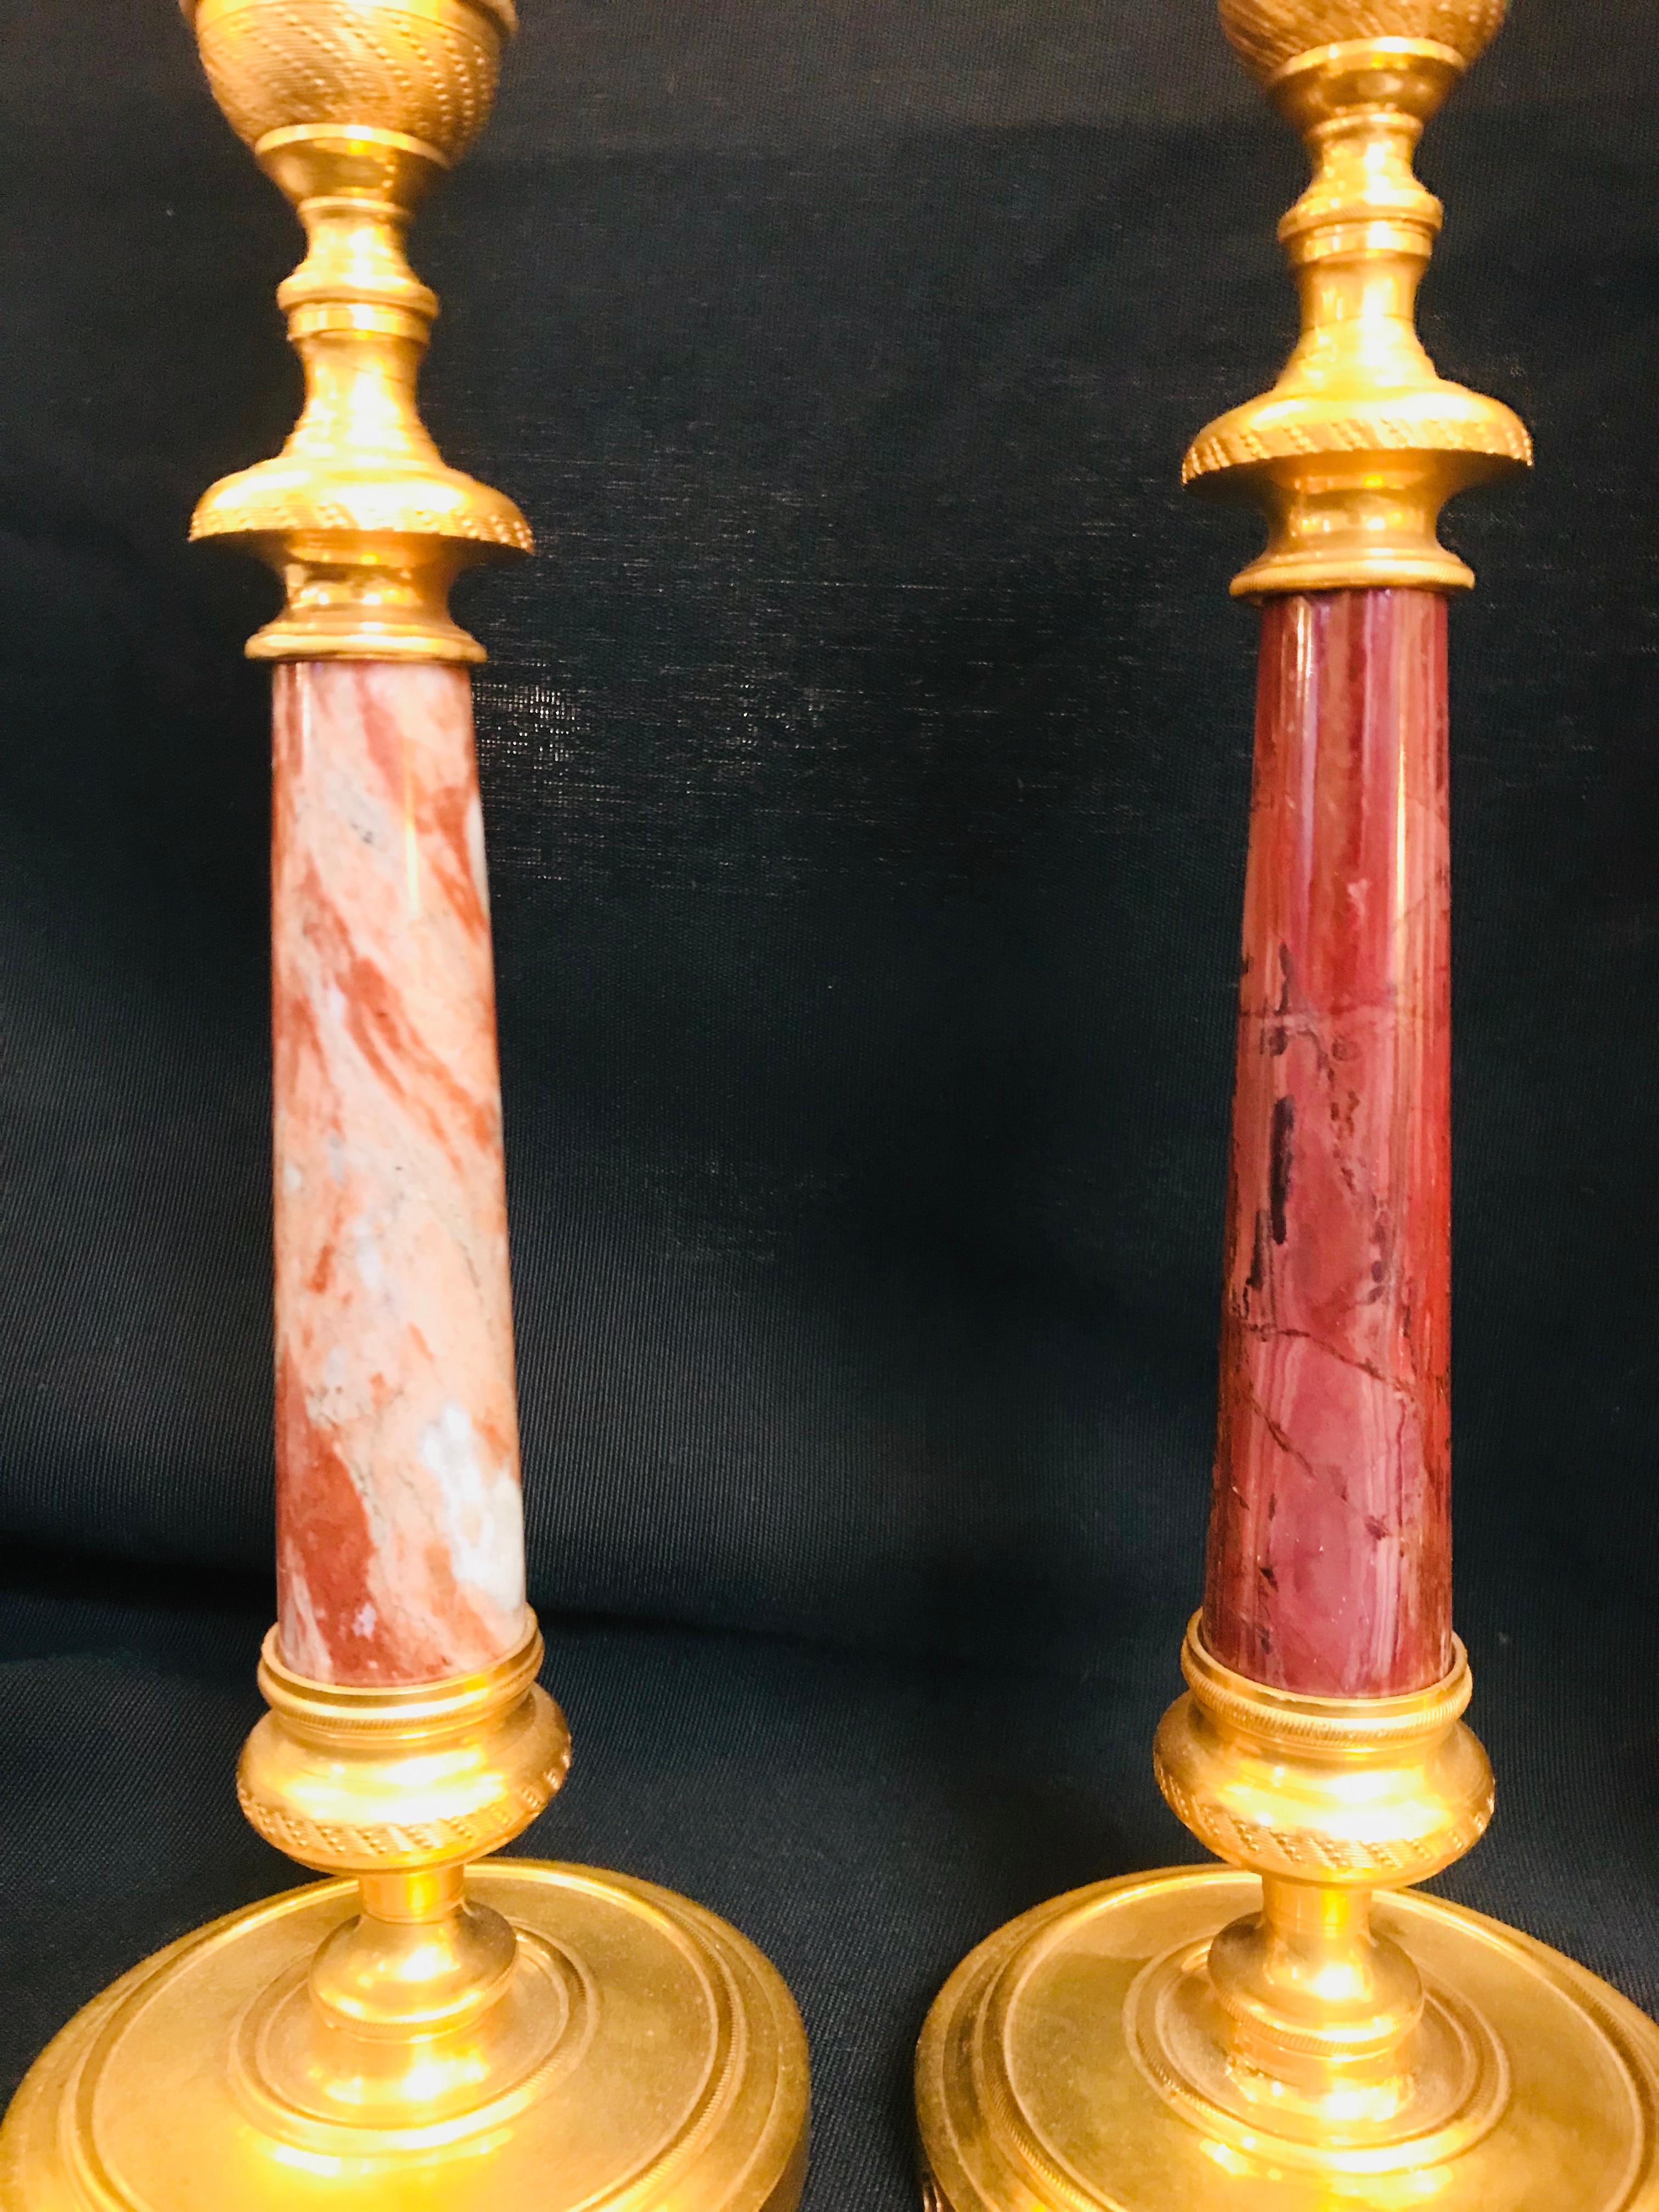 This little neoclassical style gilt bronze and marble candlestick by Gherardo Degli Albizzi would be ideal to be placed on a bedside table. Even if it features classical shape, overall in the candleholder, it mantains a quite simple design so it